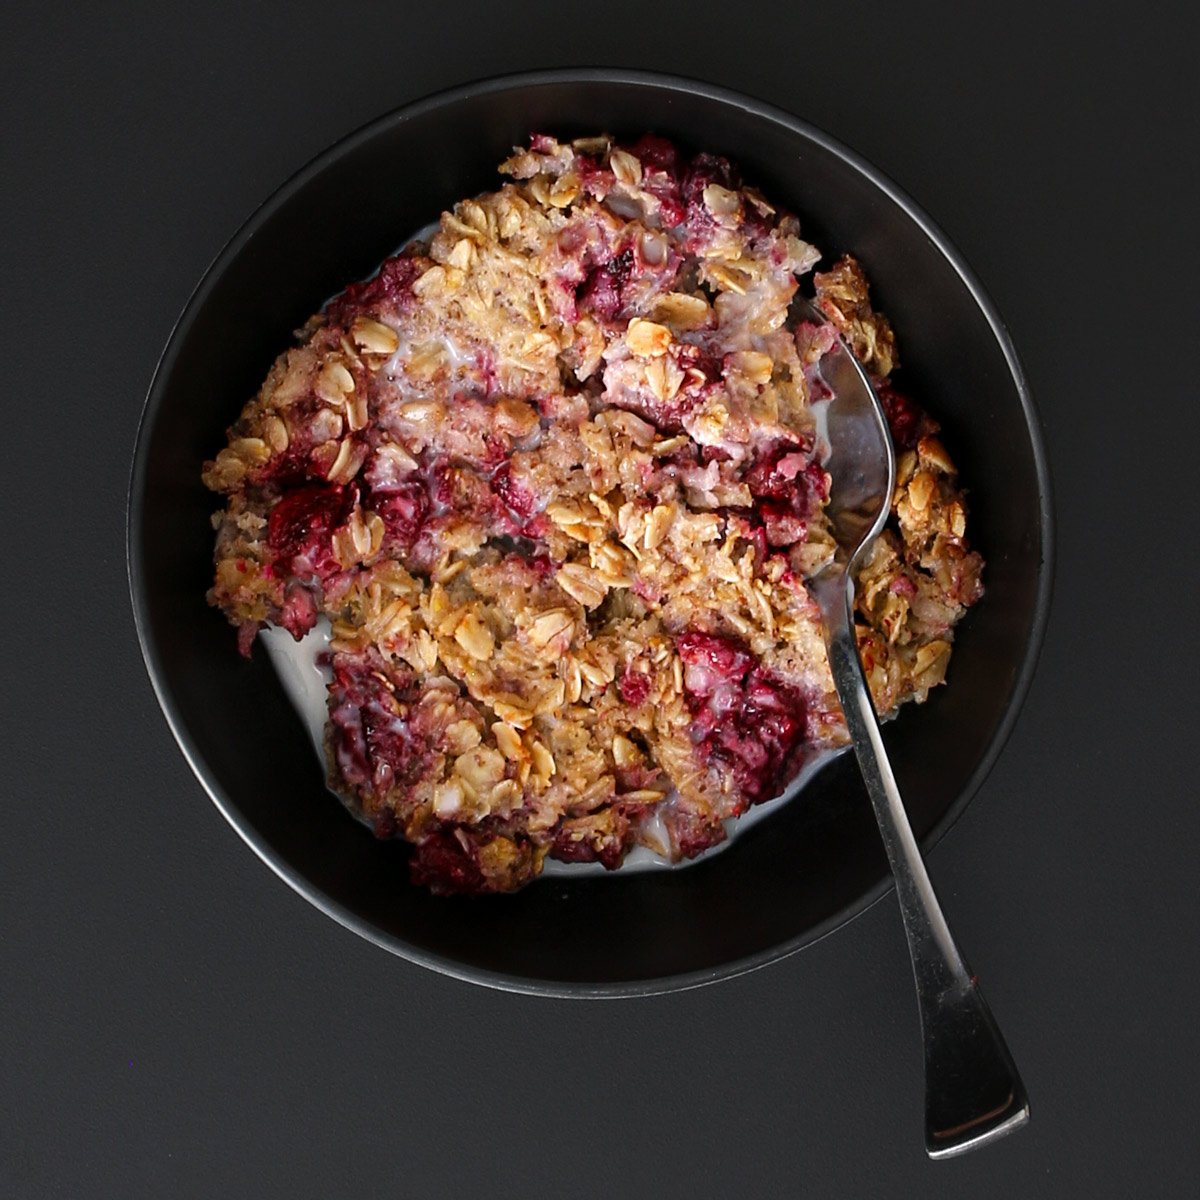 Vegan Baked Oatmeal with Raspberries (52 cents/serving)